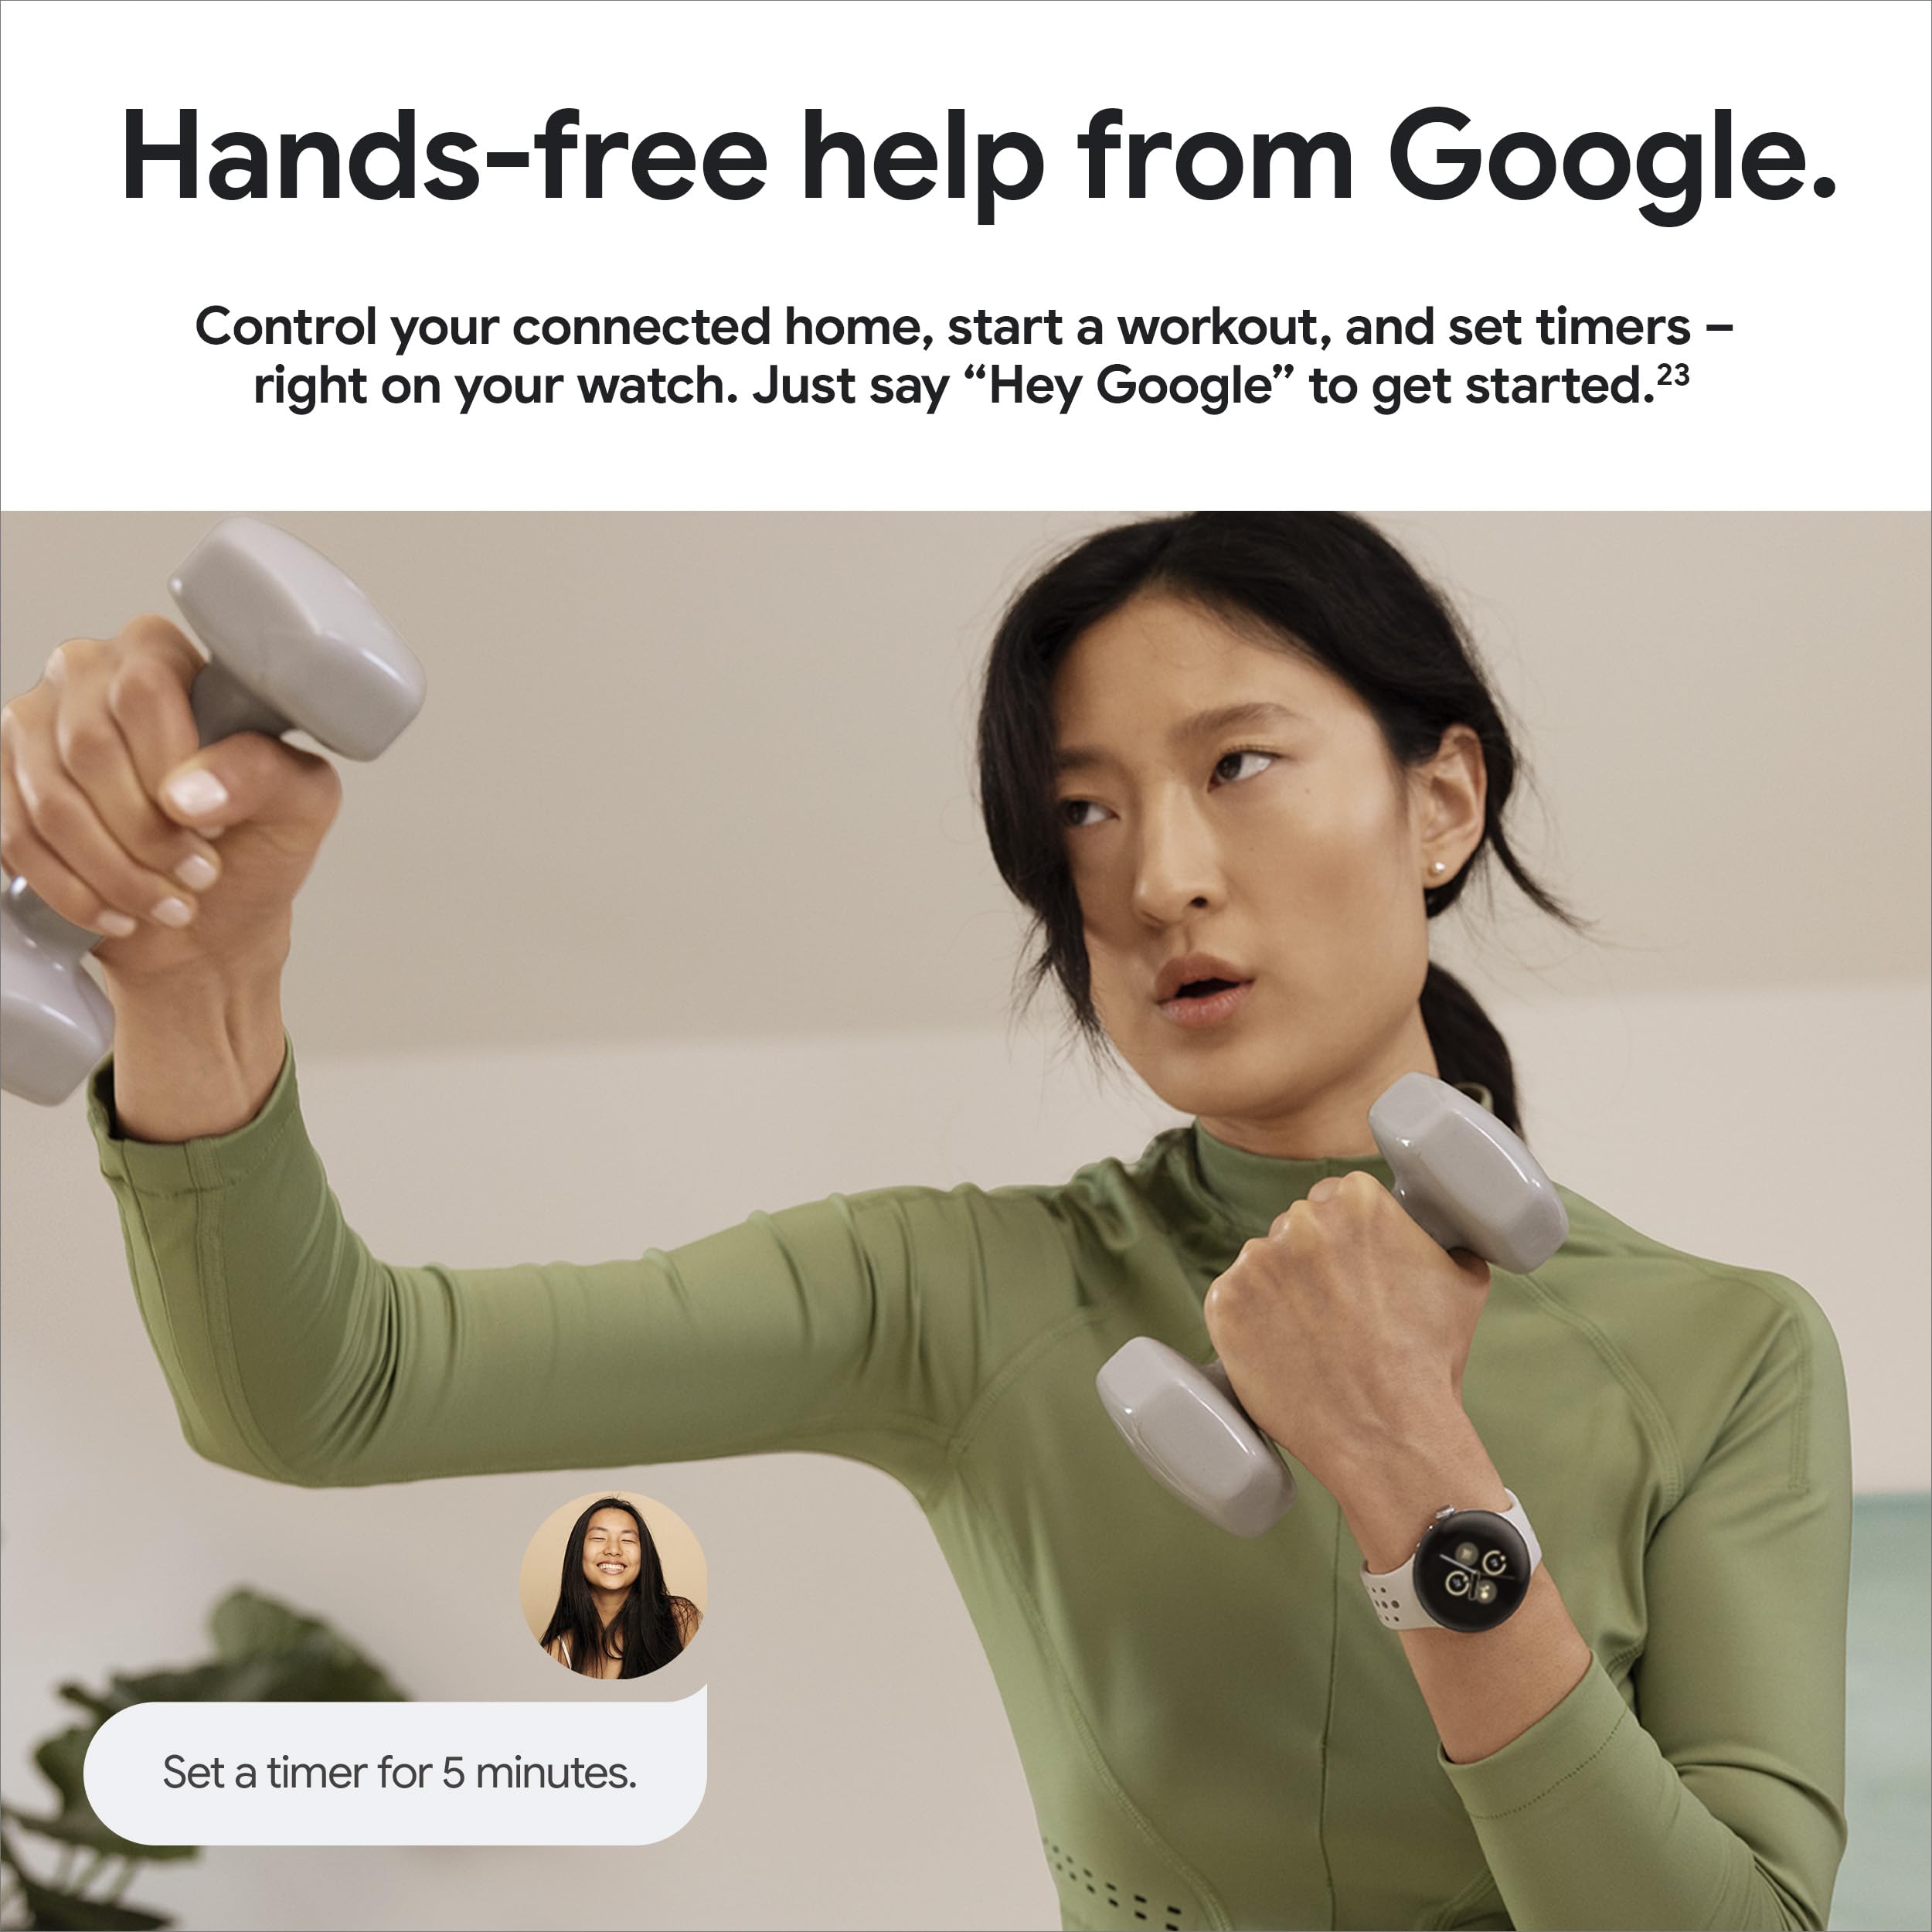 Google Pixel Watch 2 with the Best of Fitbit and Google - Heart Rate Tracking, Stress Management, Safety Features - Android Smartwatch - Polished Silver Aluminum Case - Bay Active Band - Wi-Fi